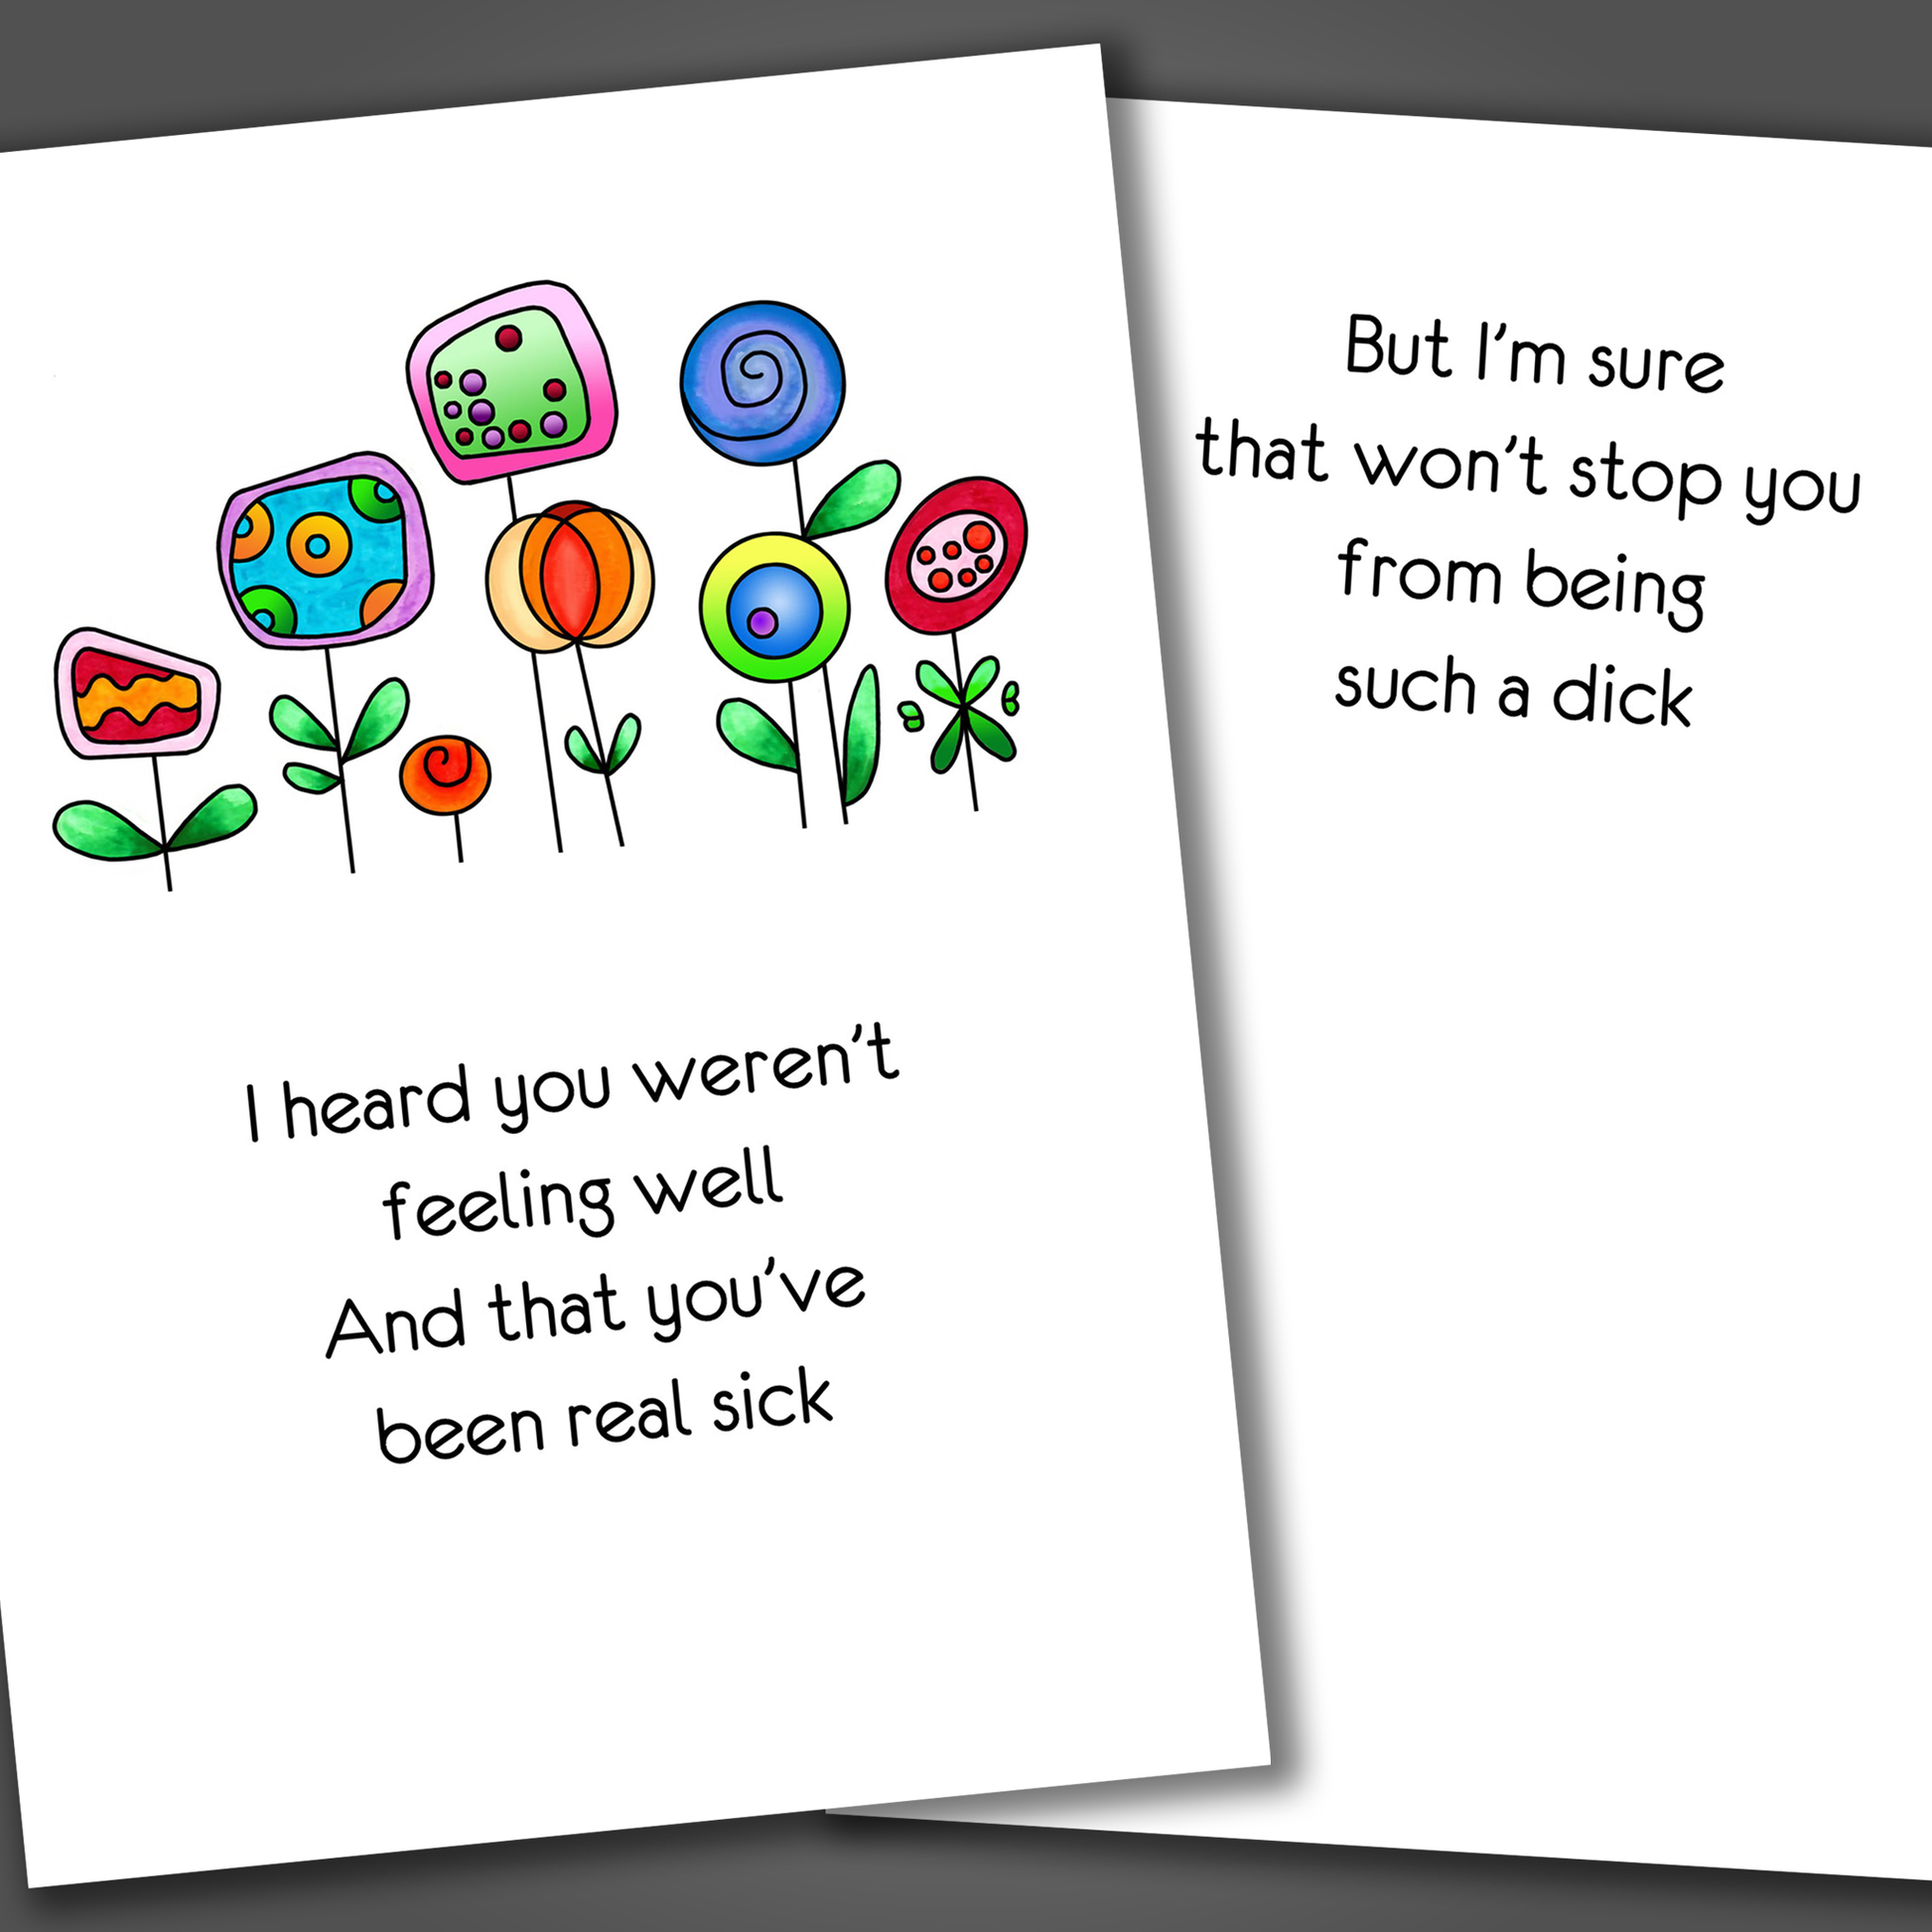 Funny get well soon card with colorful flowers drawn on the front of the card. Inside the card is a rude joke that wishes the person to get well soon and to stop being a dick!